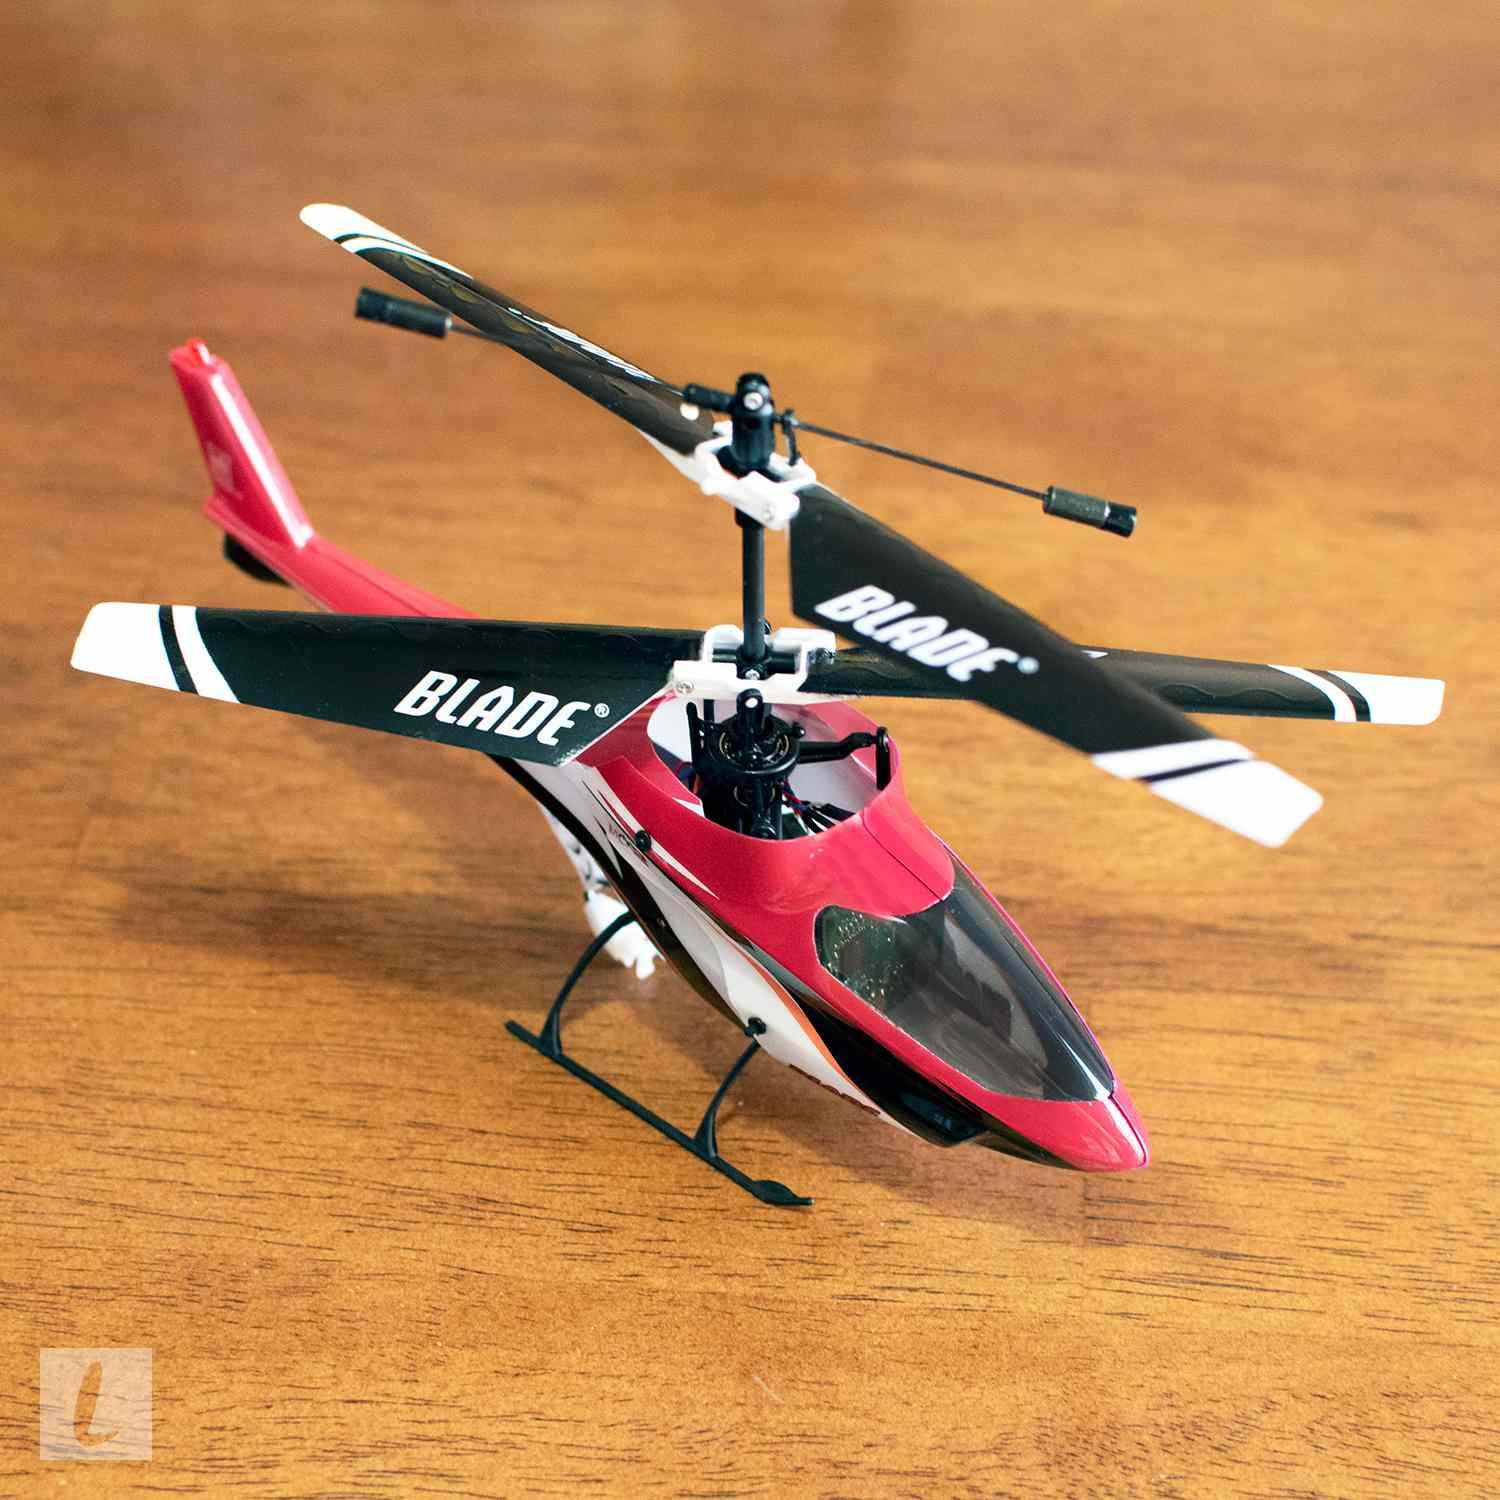 Best Fixed Pitch Rc Helicopter: Top Choice for Beginners: The Blade mCX2 Fixed Pitch RC Helicopter